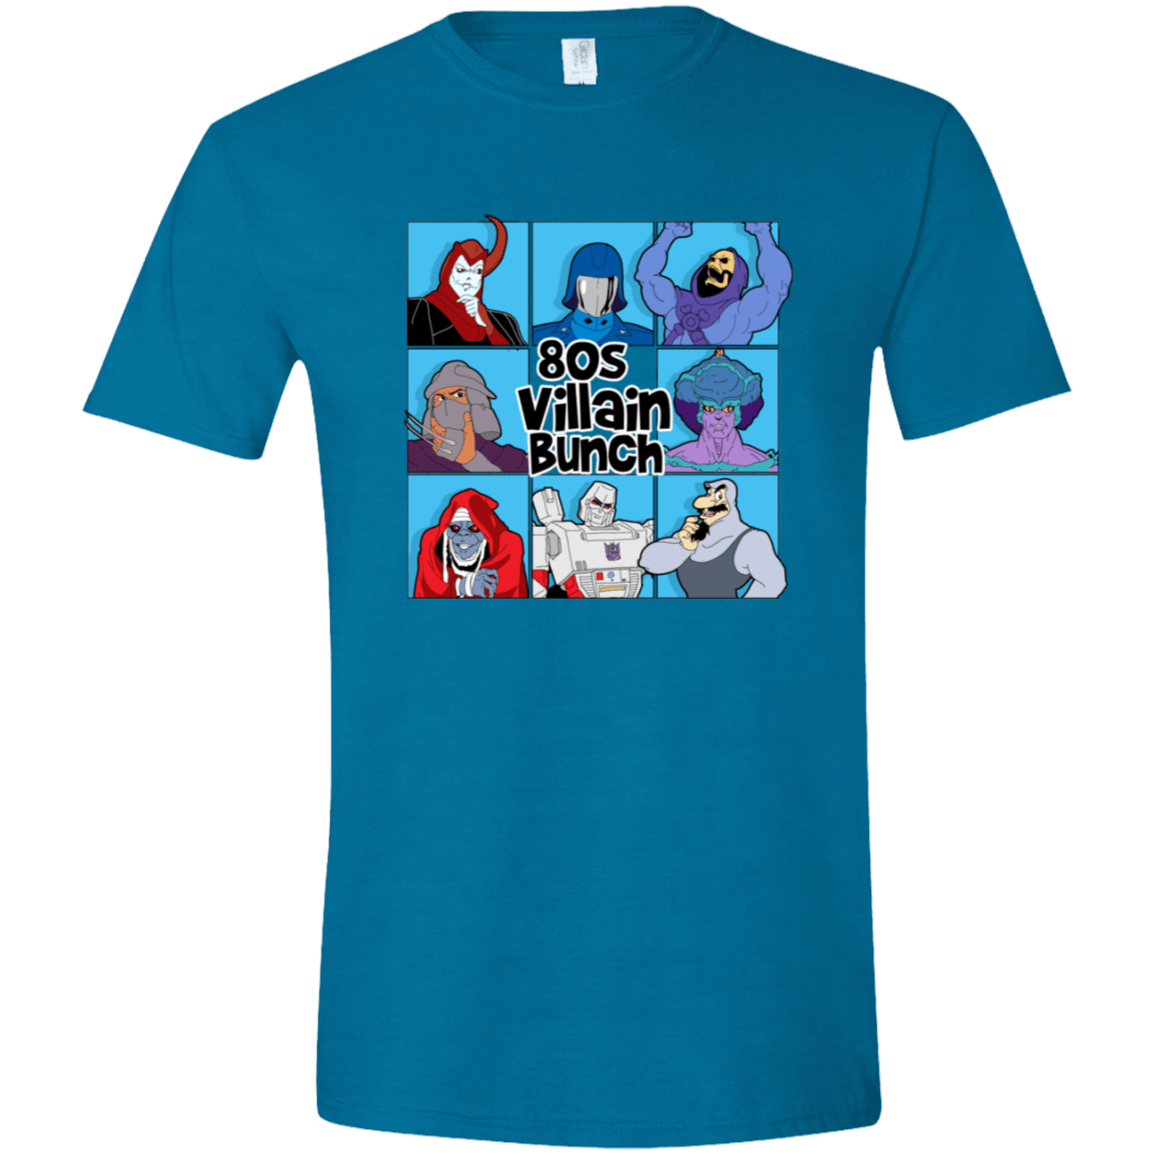 T-Shirts Antique Sapphire / S 80s Villians Bunch Men's Semi-Fitted Softstyle